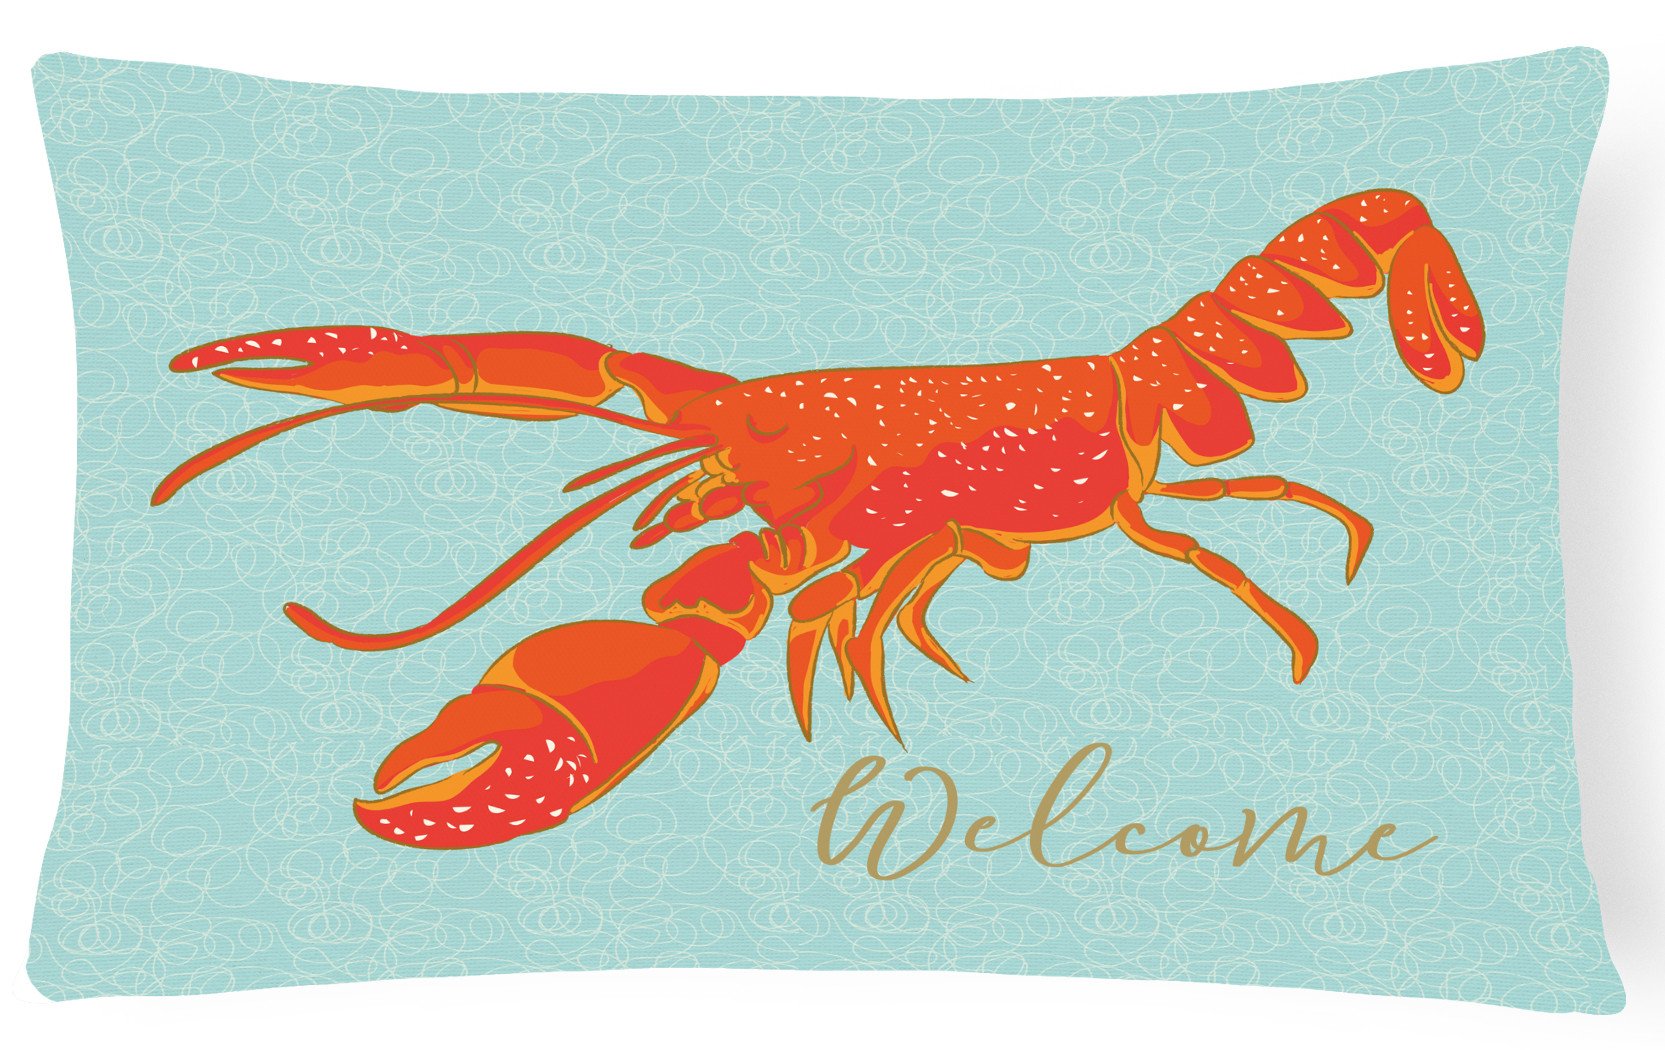 Lobster Welcome Canvas Fabric Decorative Pillow BB8534PW1216 by Caroline's Treasures